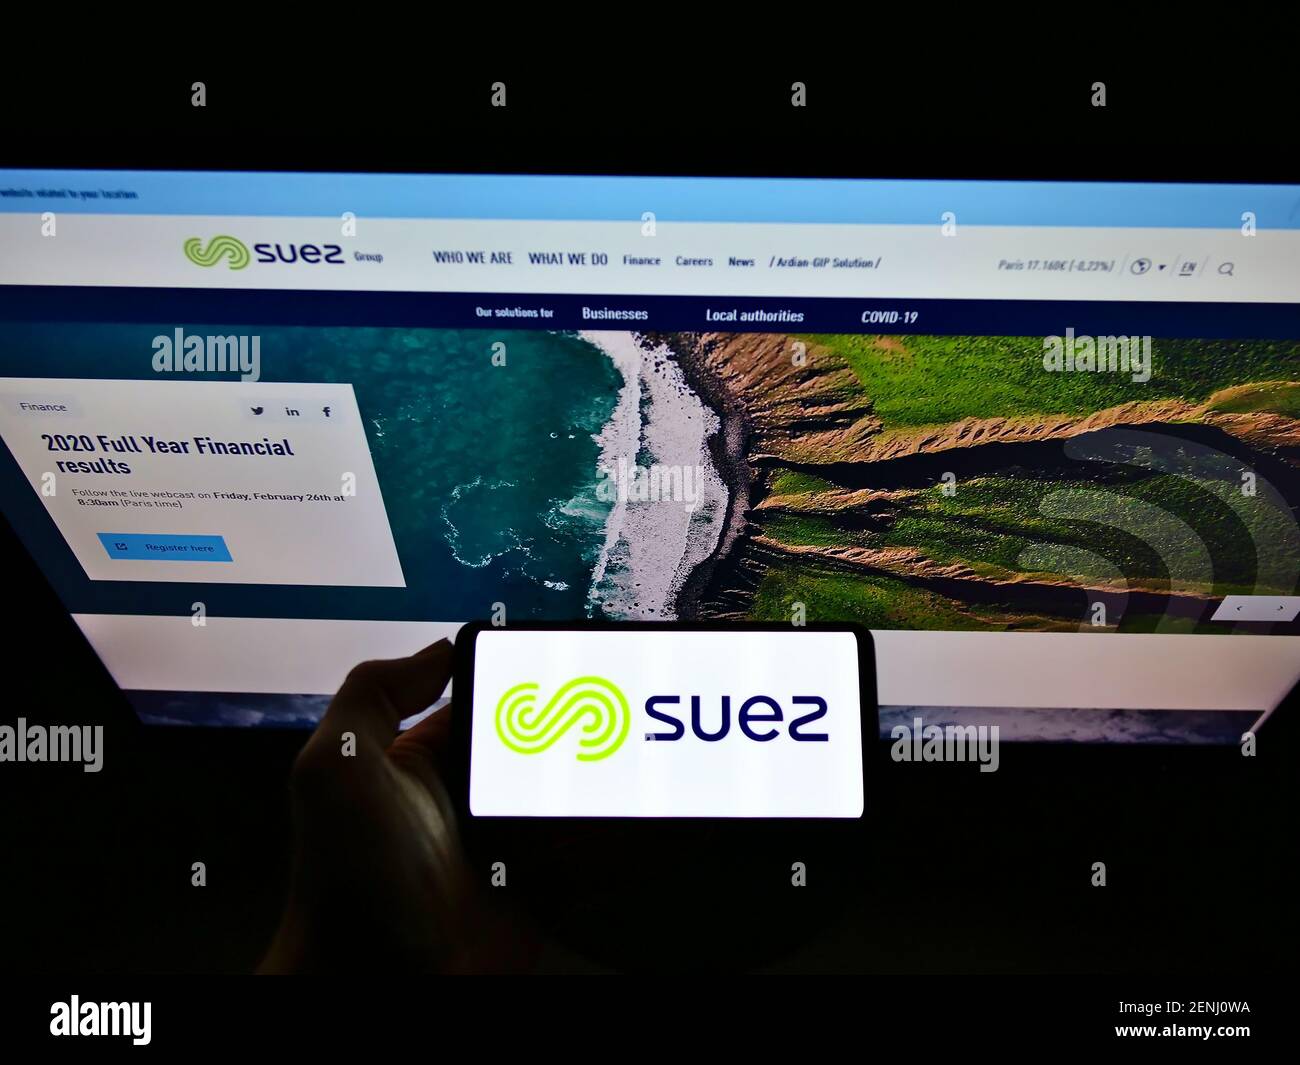 Person holding smartphone with logo of French utility company Suez S.A. on screen in front of website. Focus on phone display. Unmodified photo. Stock Photo